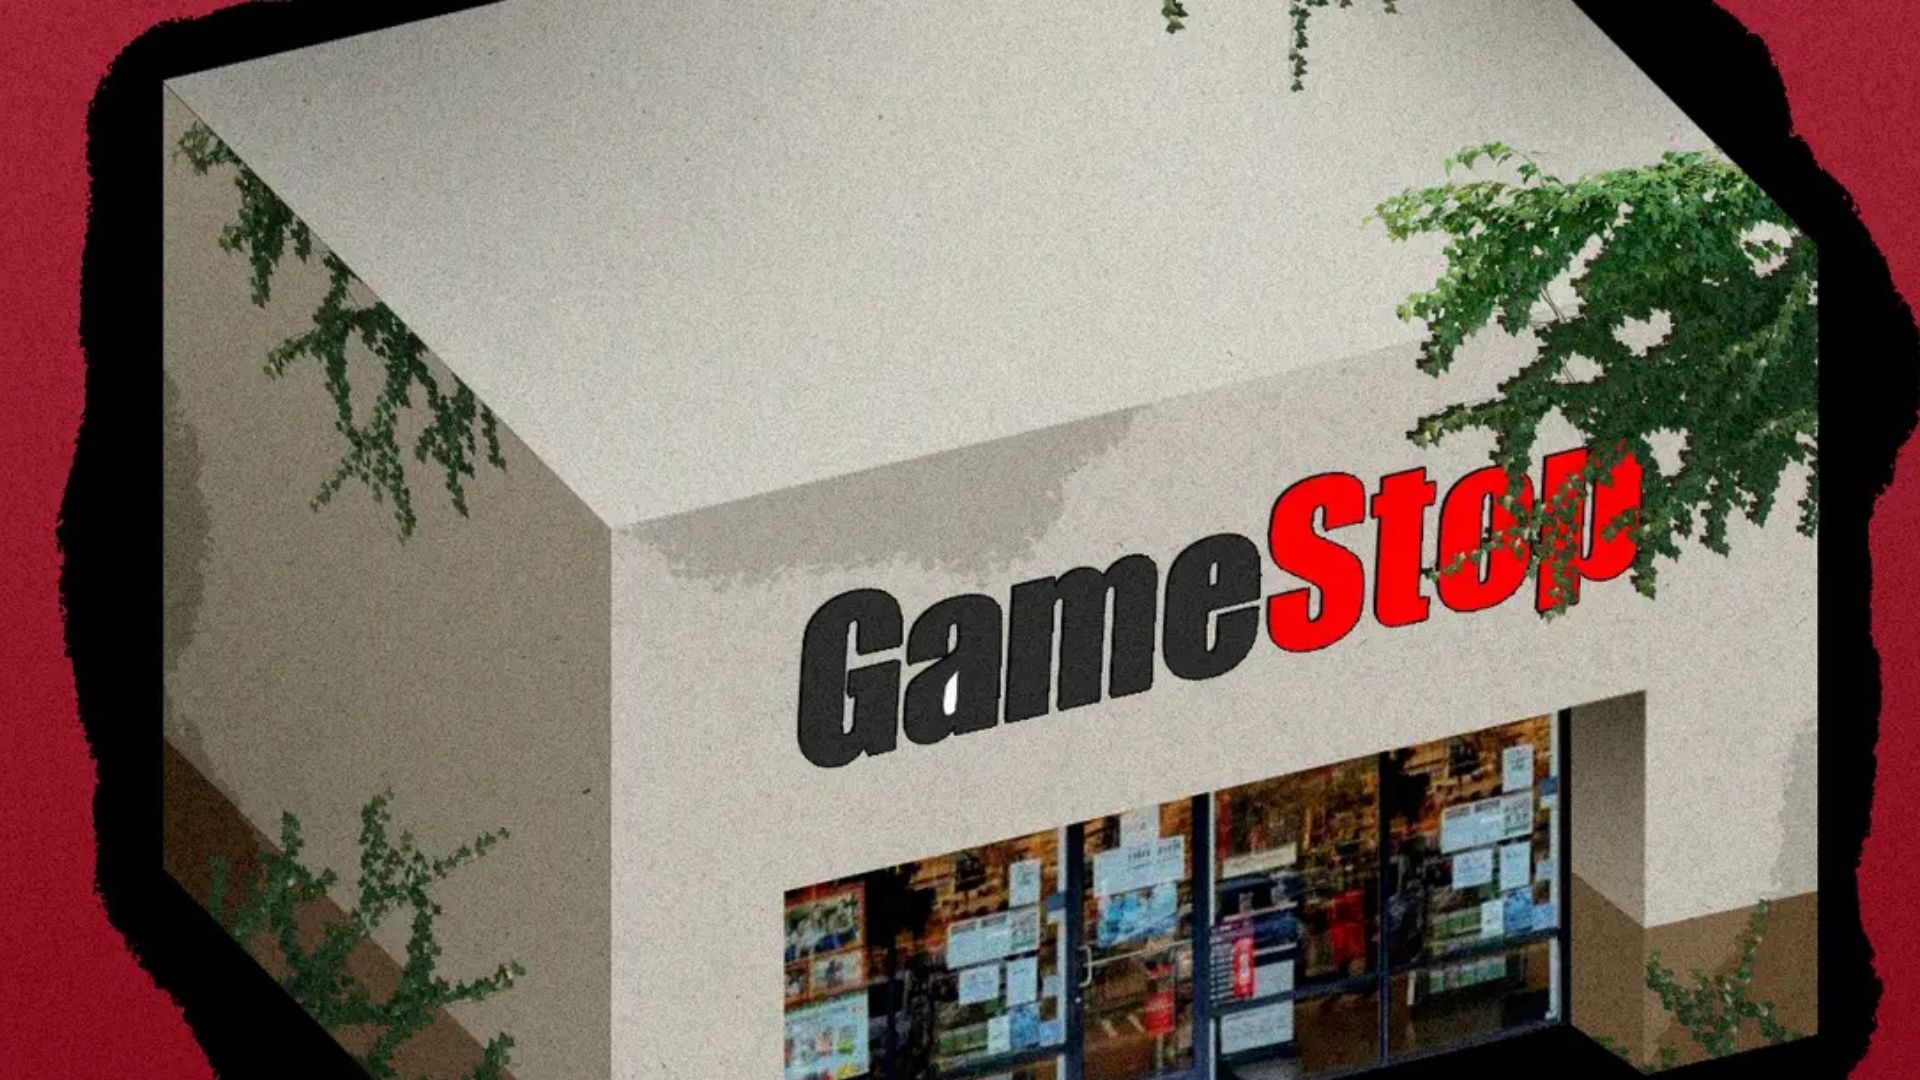 Meme stock mania is back: Why everyone is talking about GameStop, AMC and more again